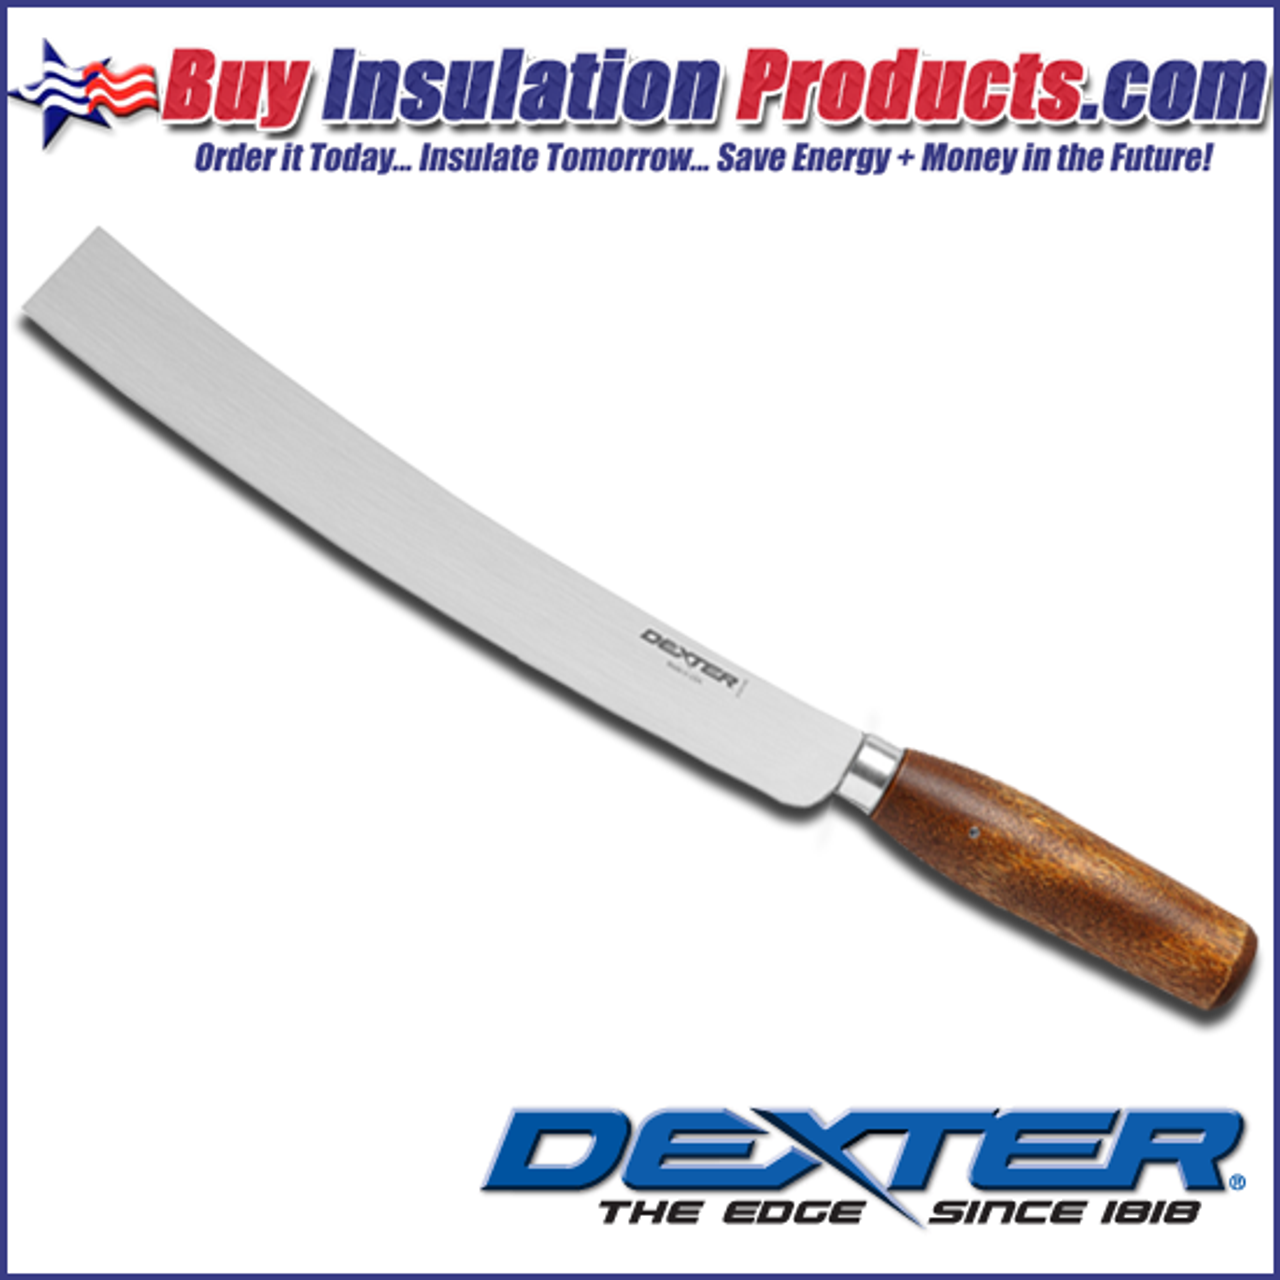 https://cdn11.bigcommerce.com/s-sjt5ll3s/images/stencil/1280x1280/products/241/3092/Dexter_Russell_10_inch_Rubber_Insulation_Knife__08904.1687296831.png?c=2